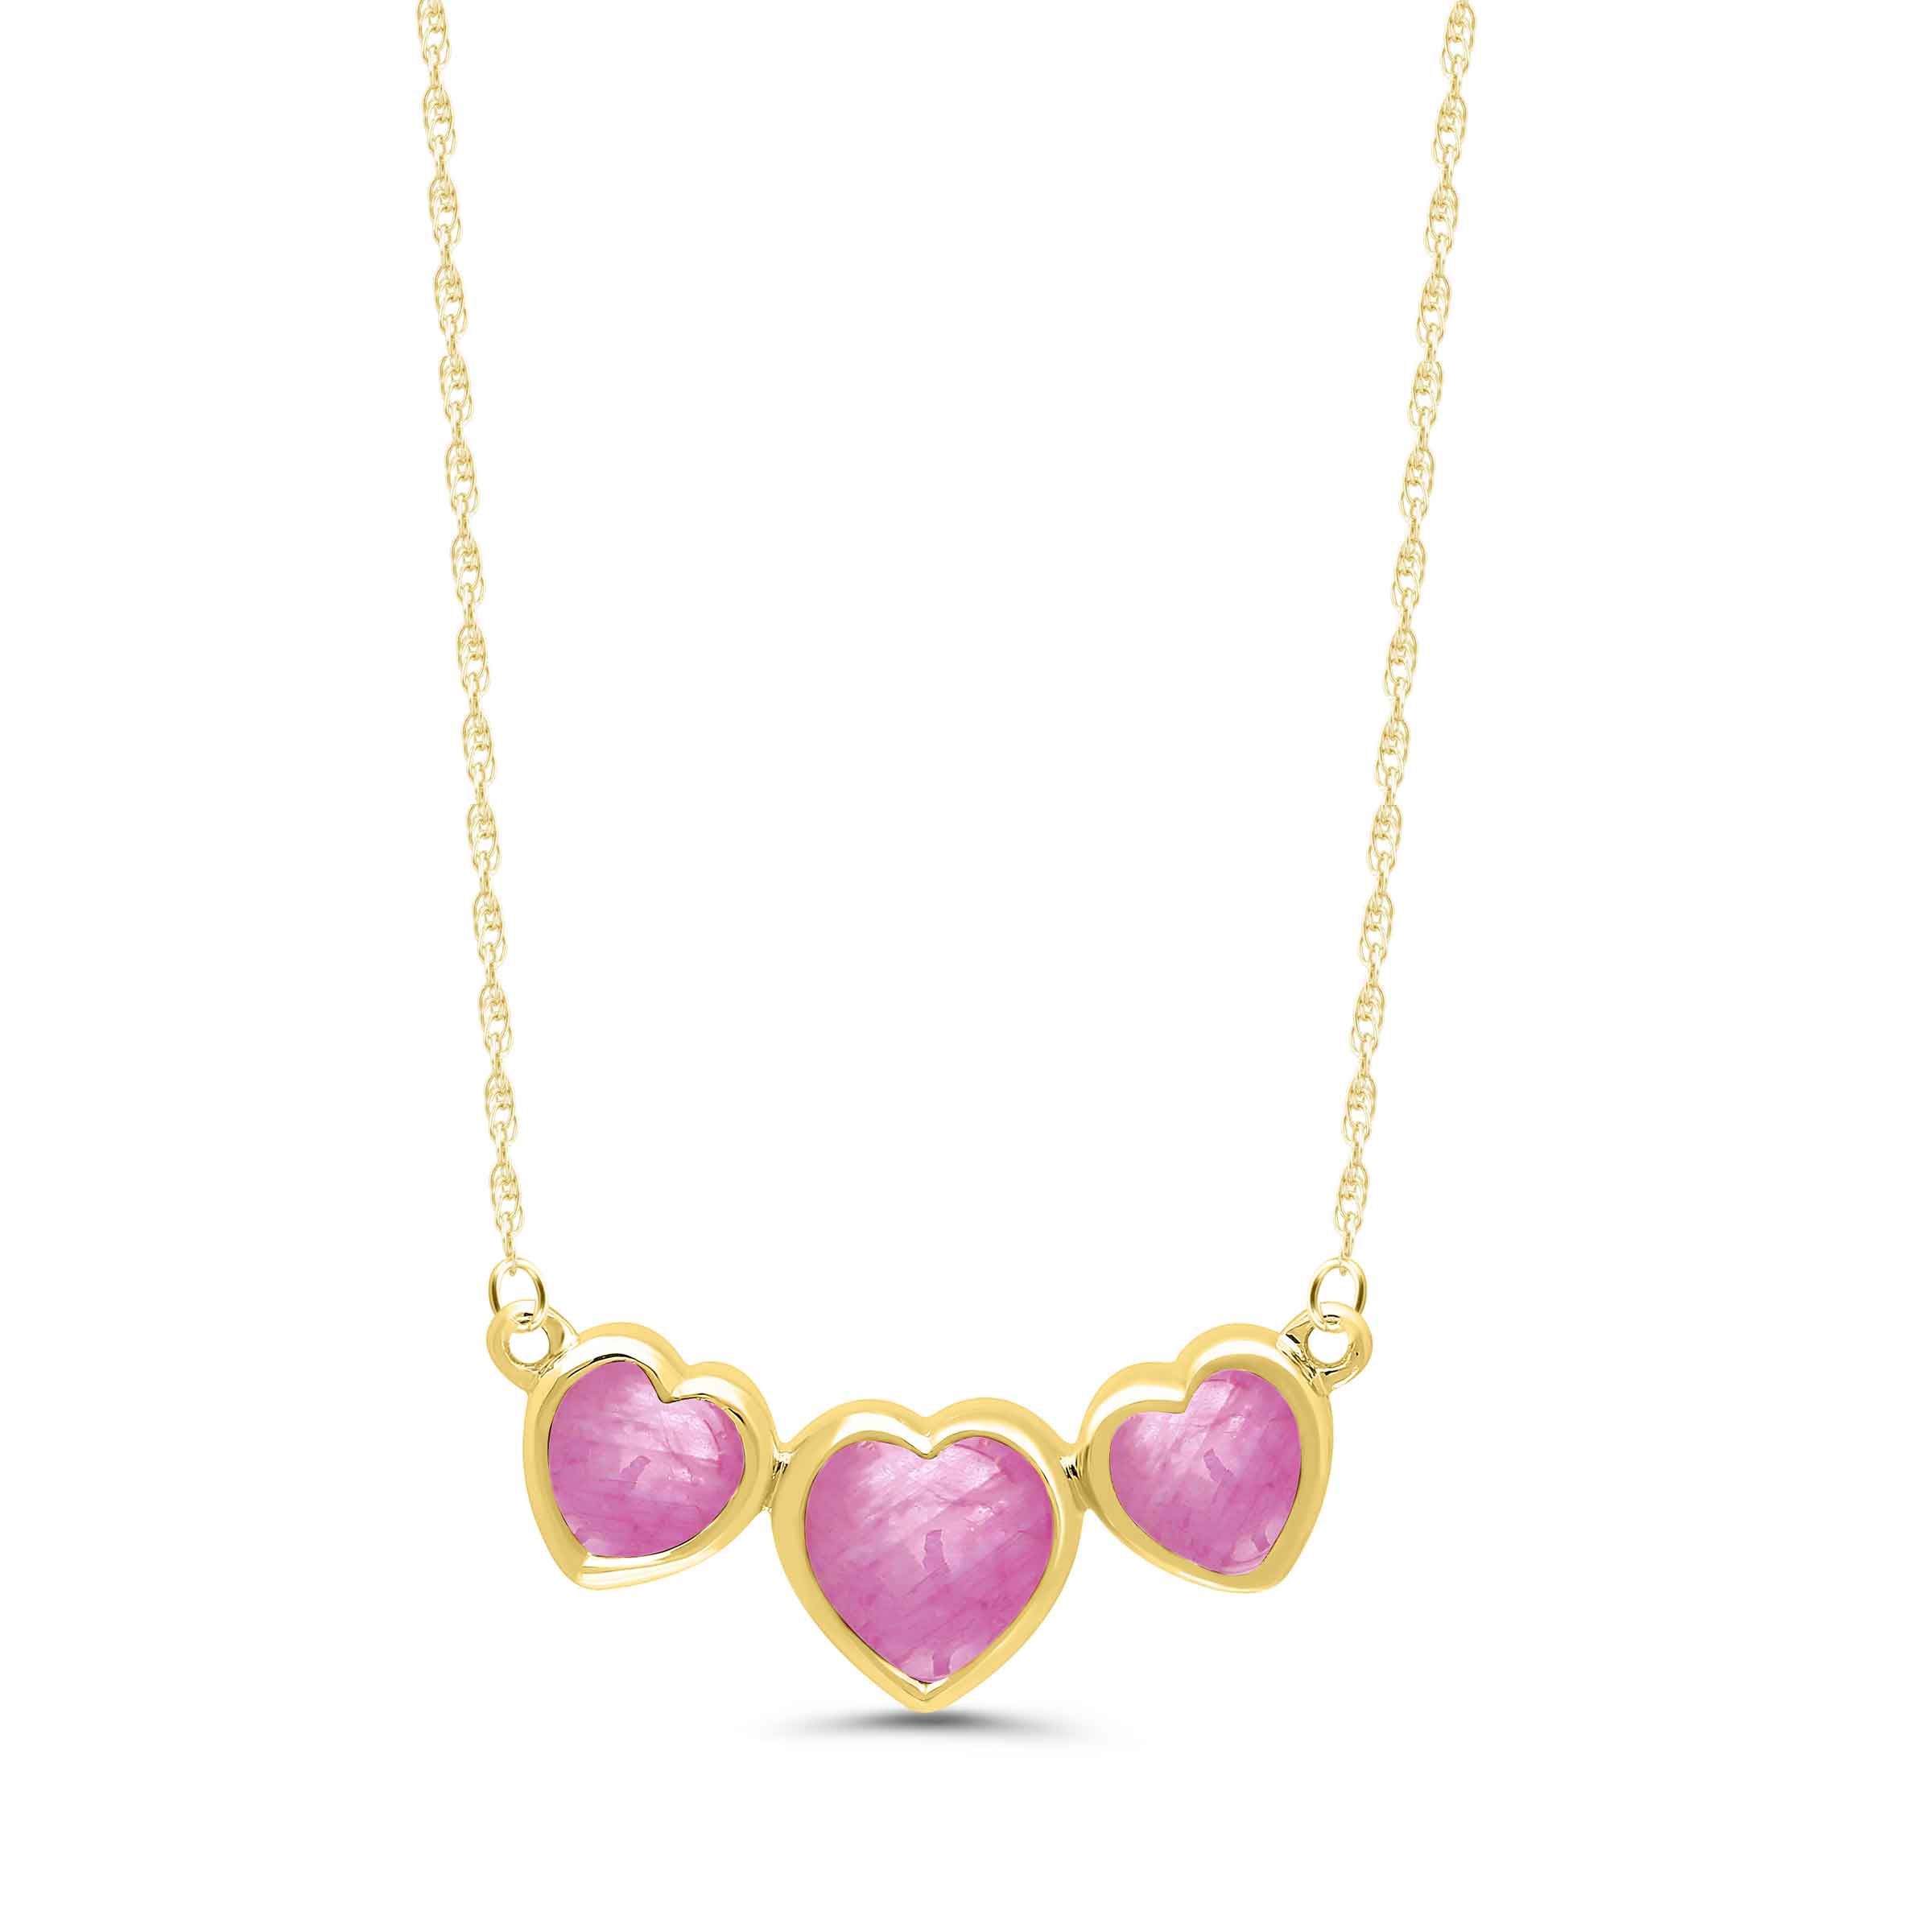 Necklace of Pink Sapphire Hearts, 14K Yellow Gold